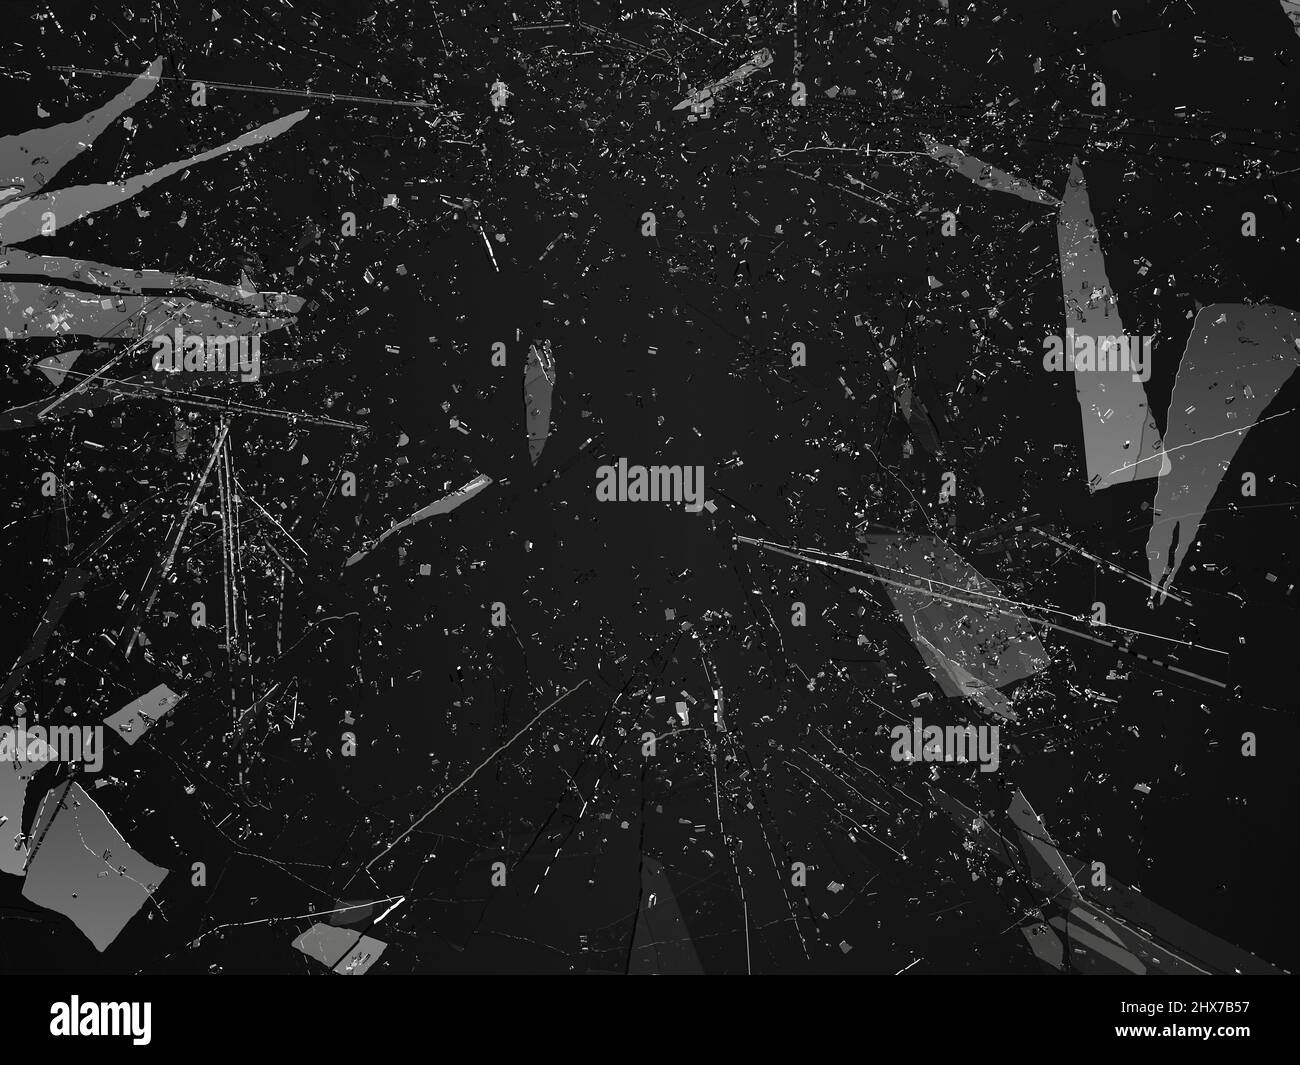 Pieces of shattered glass broken or cracked on black background, 3d illustration; 3d rendering Stock Photo